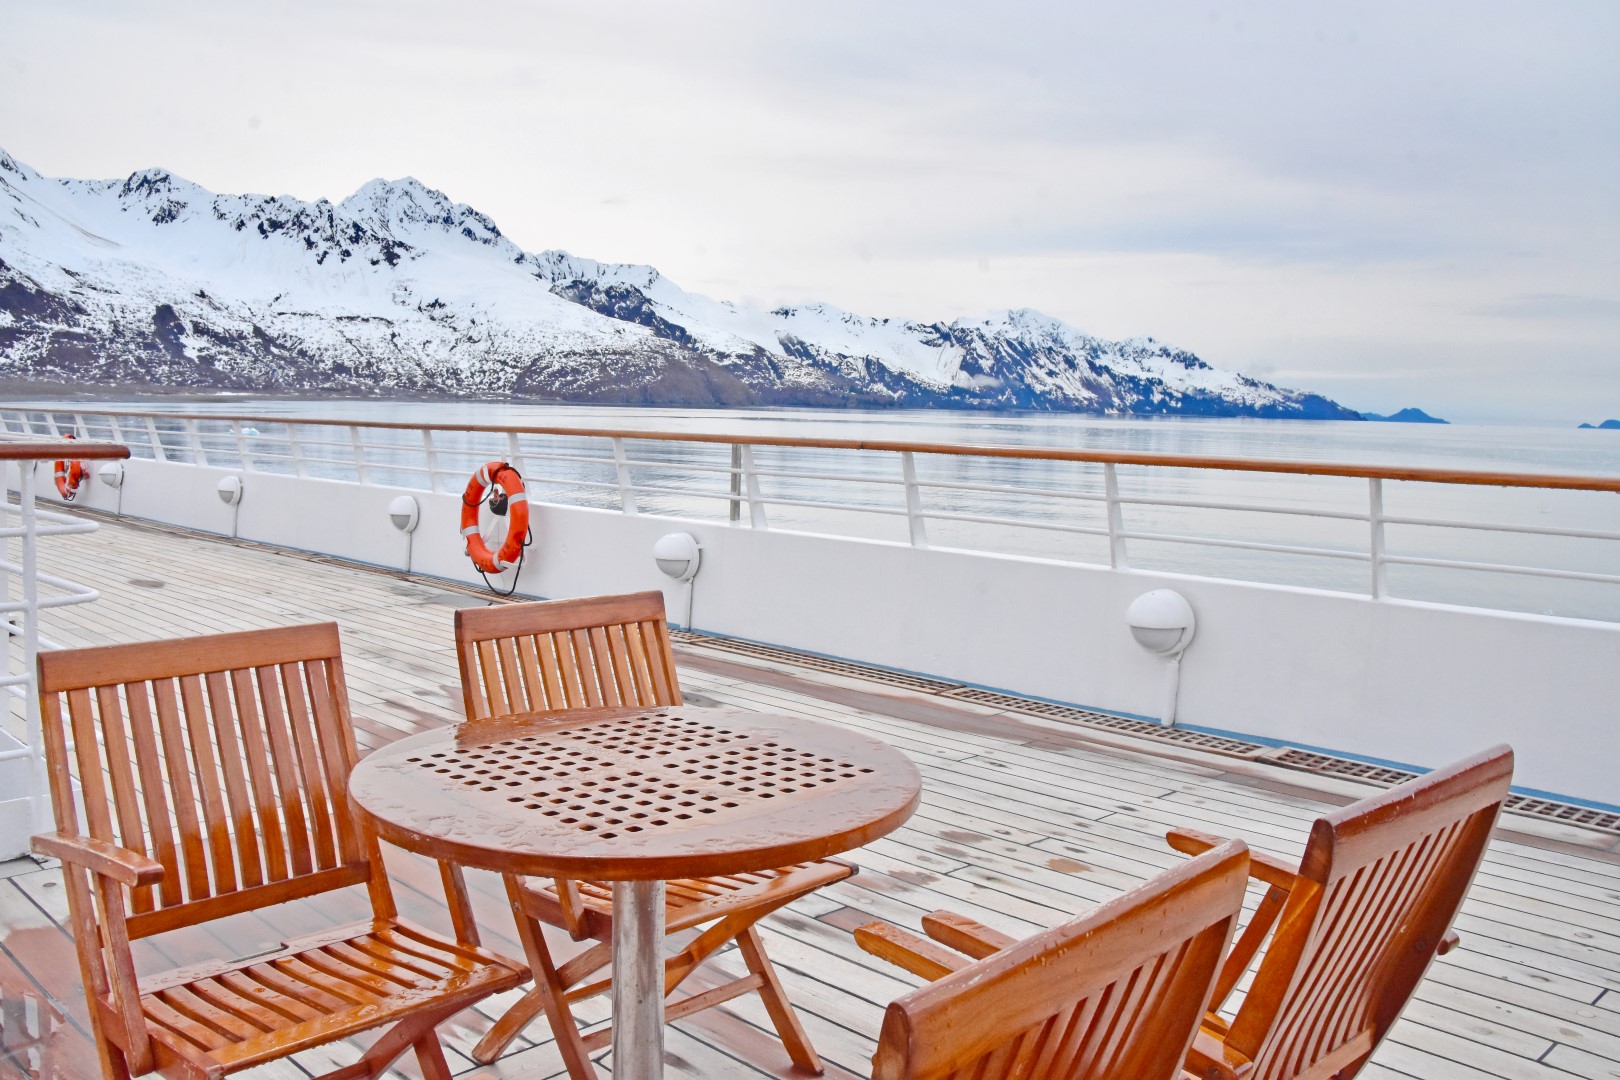 Star Legend deck and seating area with view of Alaskan mountains - Photo Credit: Kristina Buangin